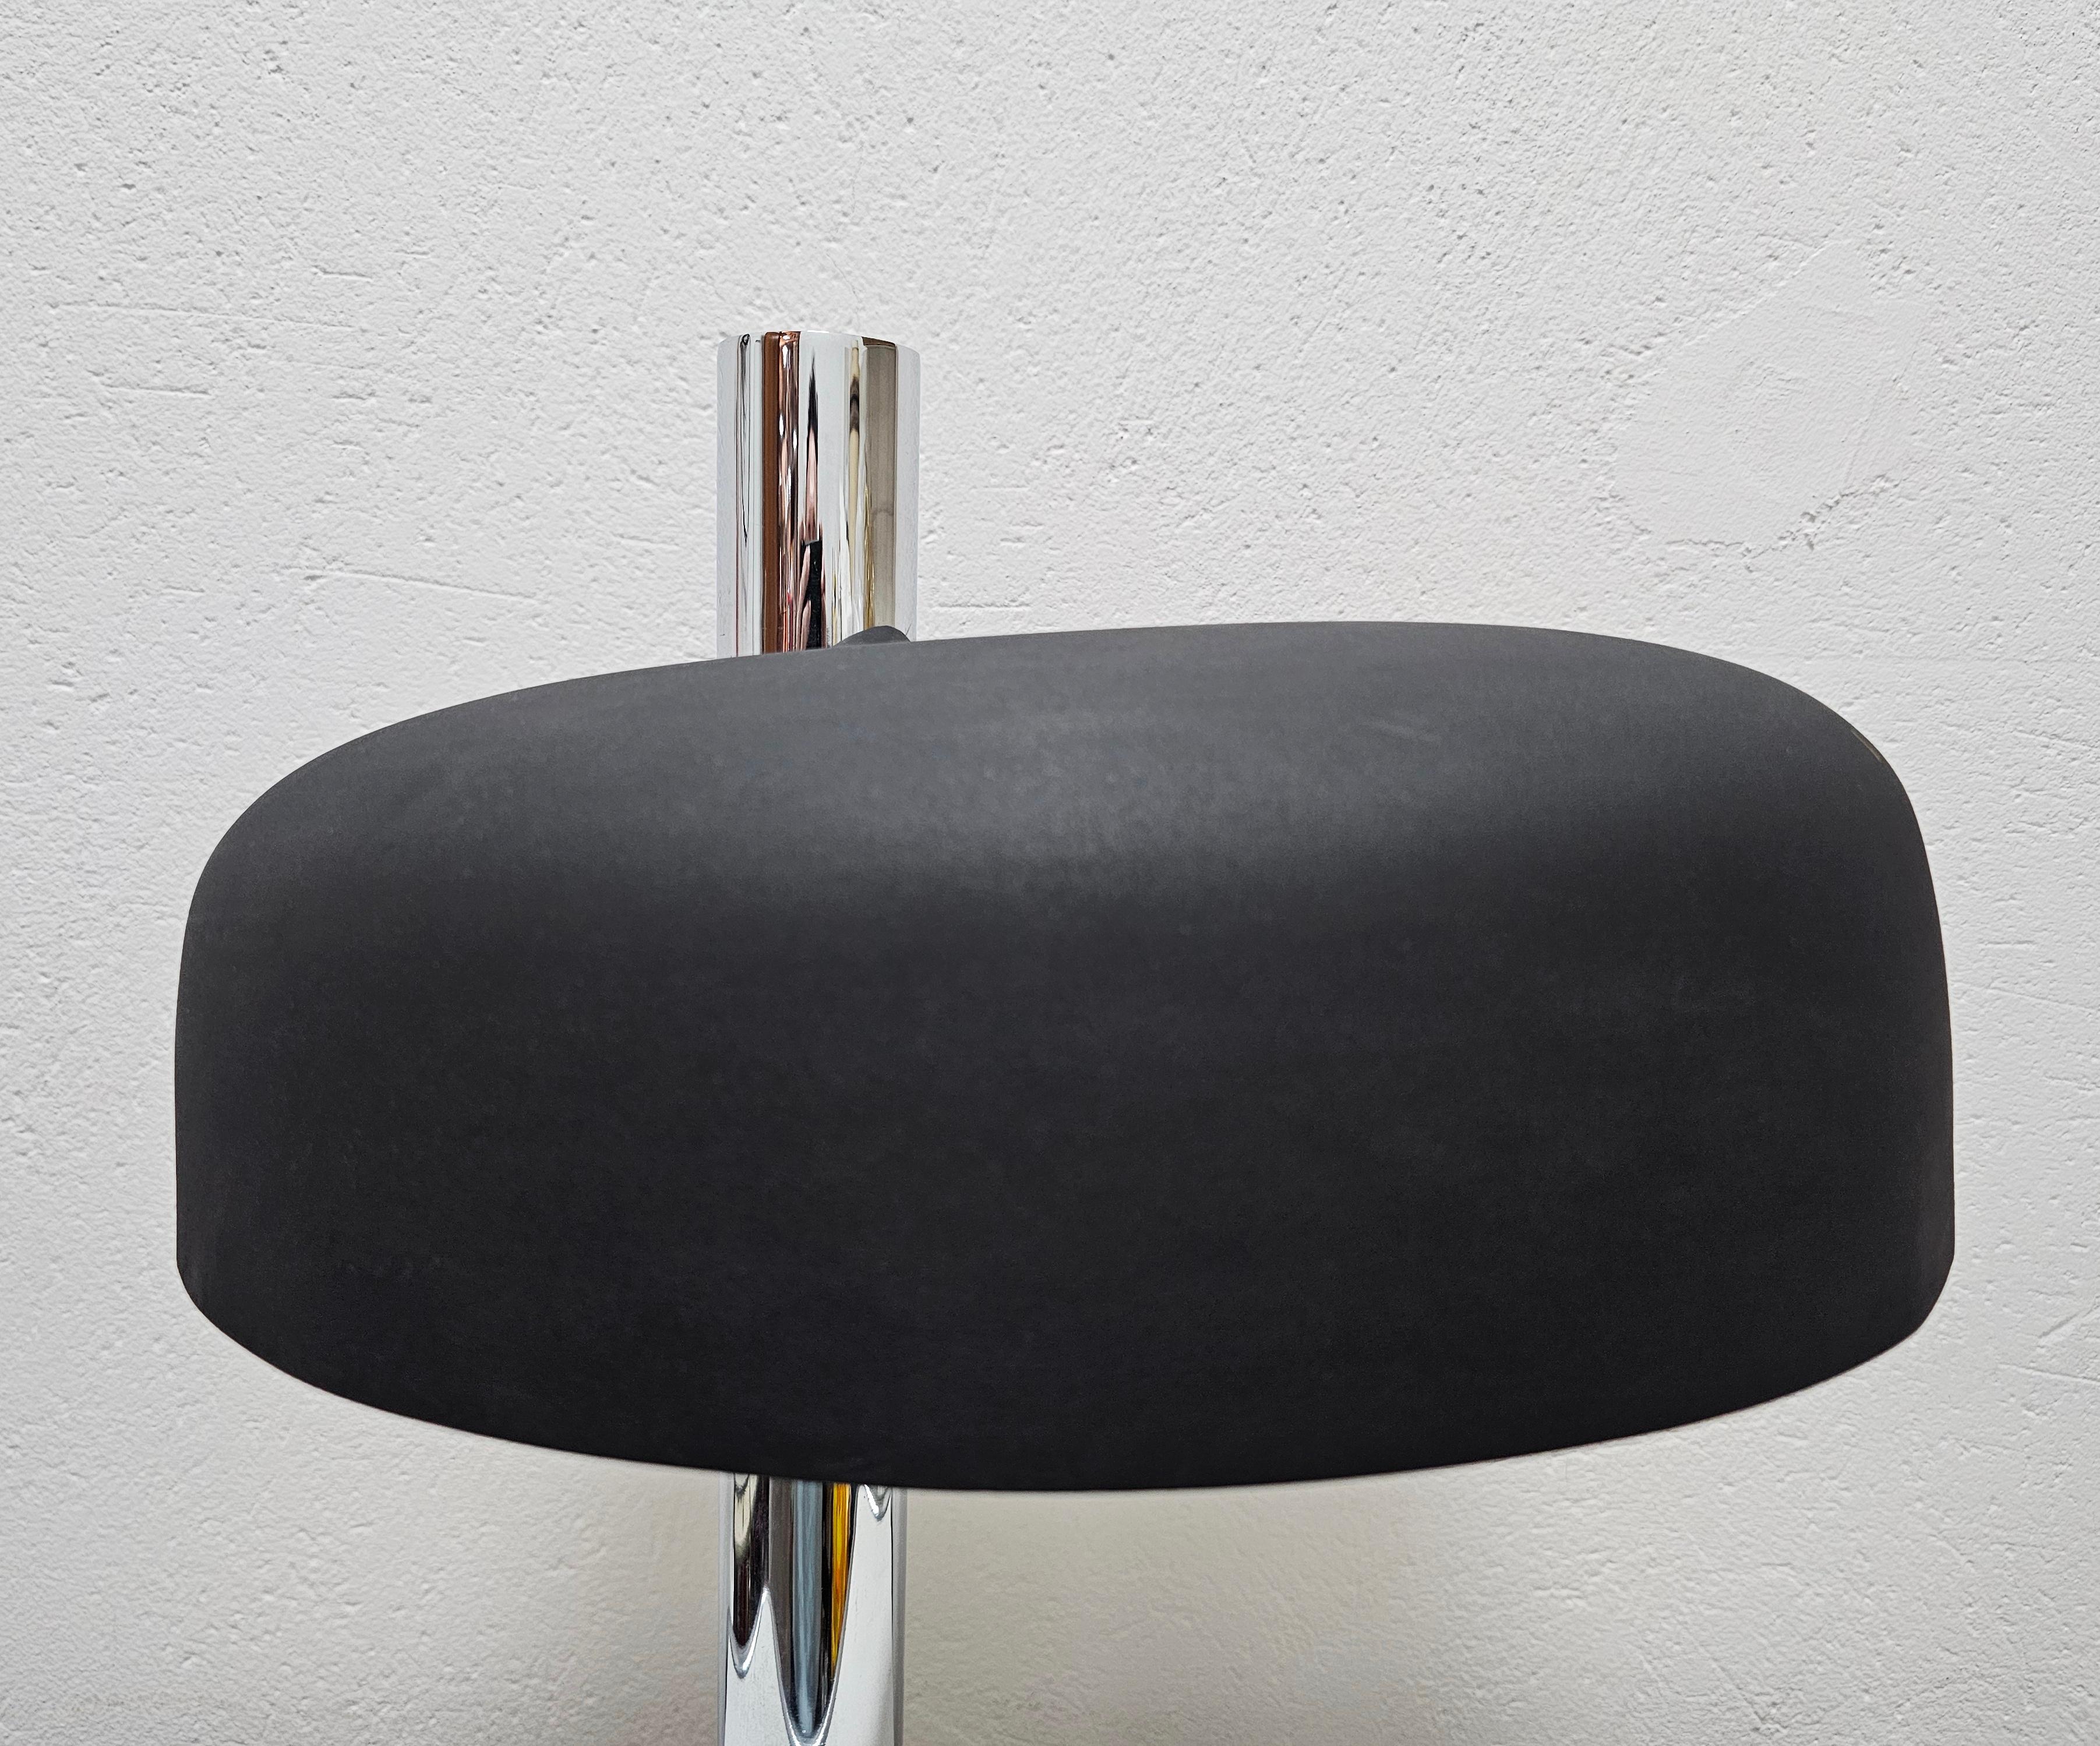 Bauhaus Style Table Lamp Model 7603 designed by Heinz Pfaender for Hillebrand  For Sale 4